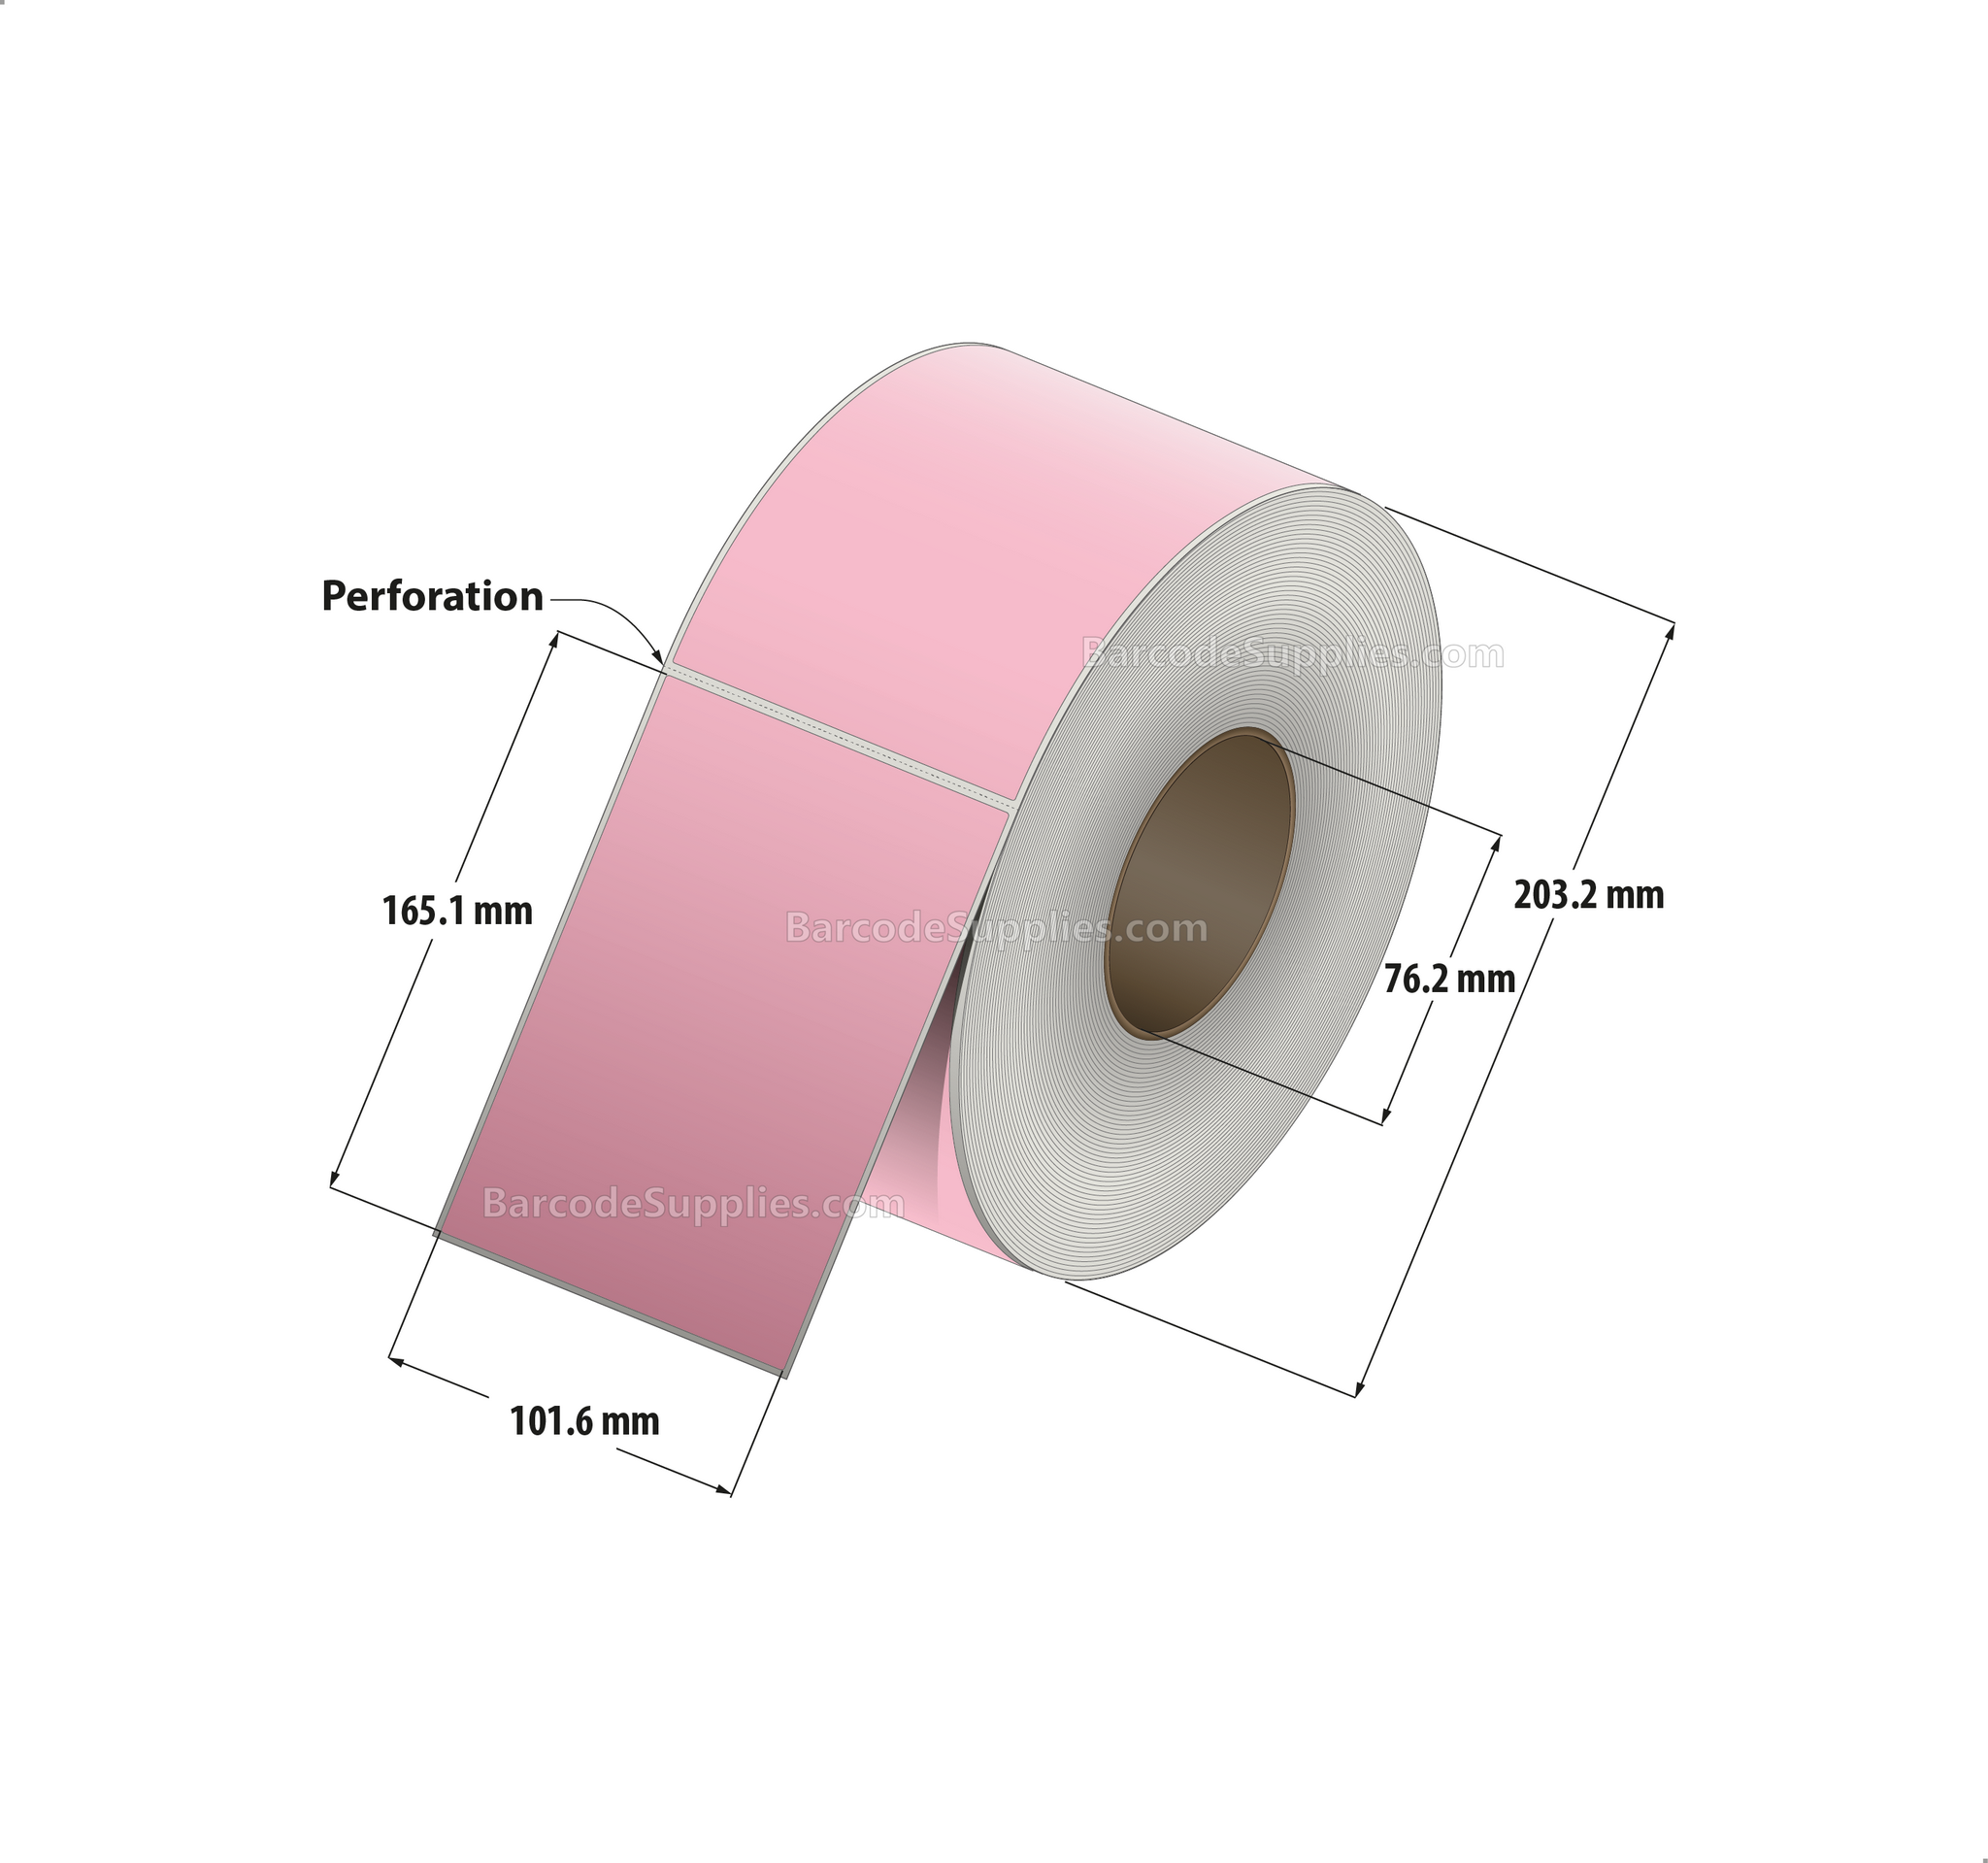 4 x 6.5 Thermal Transfer 176 Pink Labels With Permanent Adhesive - Perforated - 900 Labels Per Roll - Carton Of 4 Rolls - 3600 Labels Total - MPN: RFC-4-65-900-PK